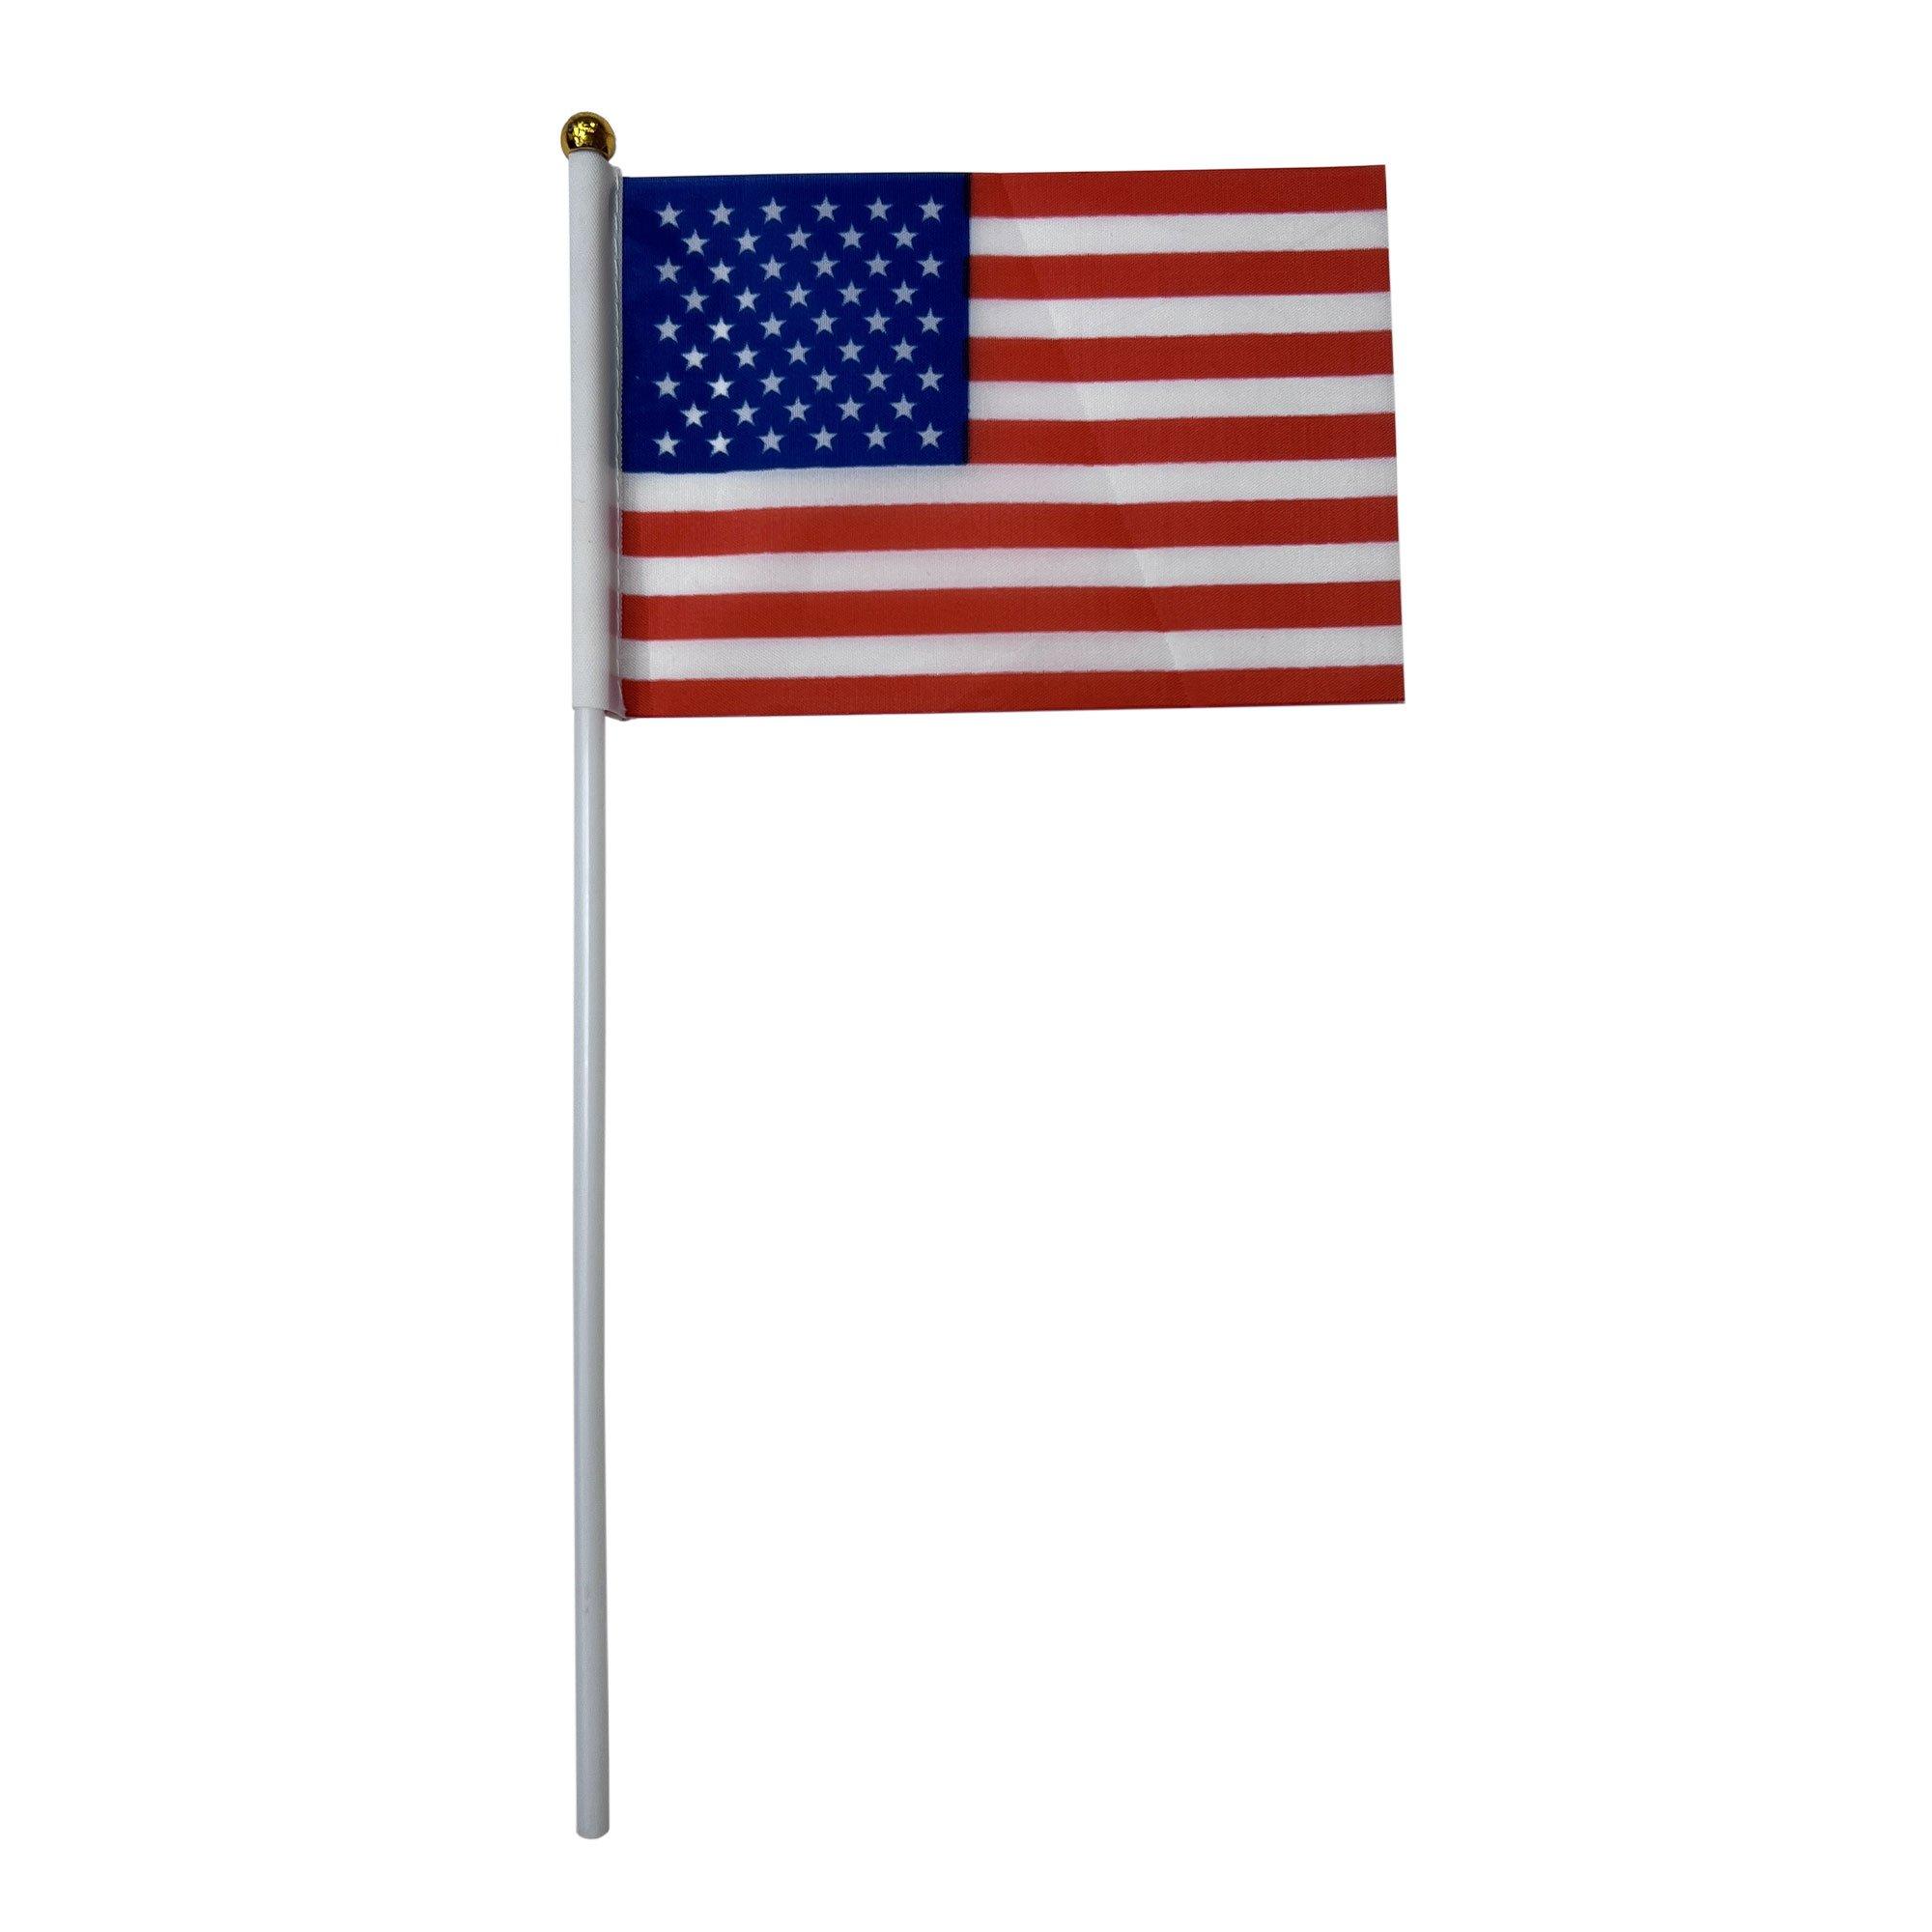 Fabric American Flag on a Stick